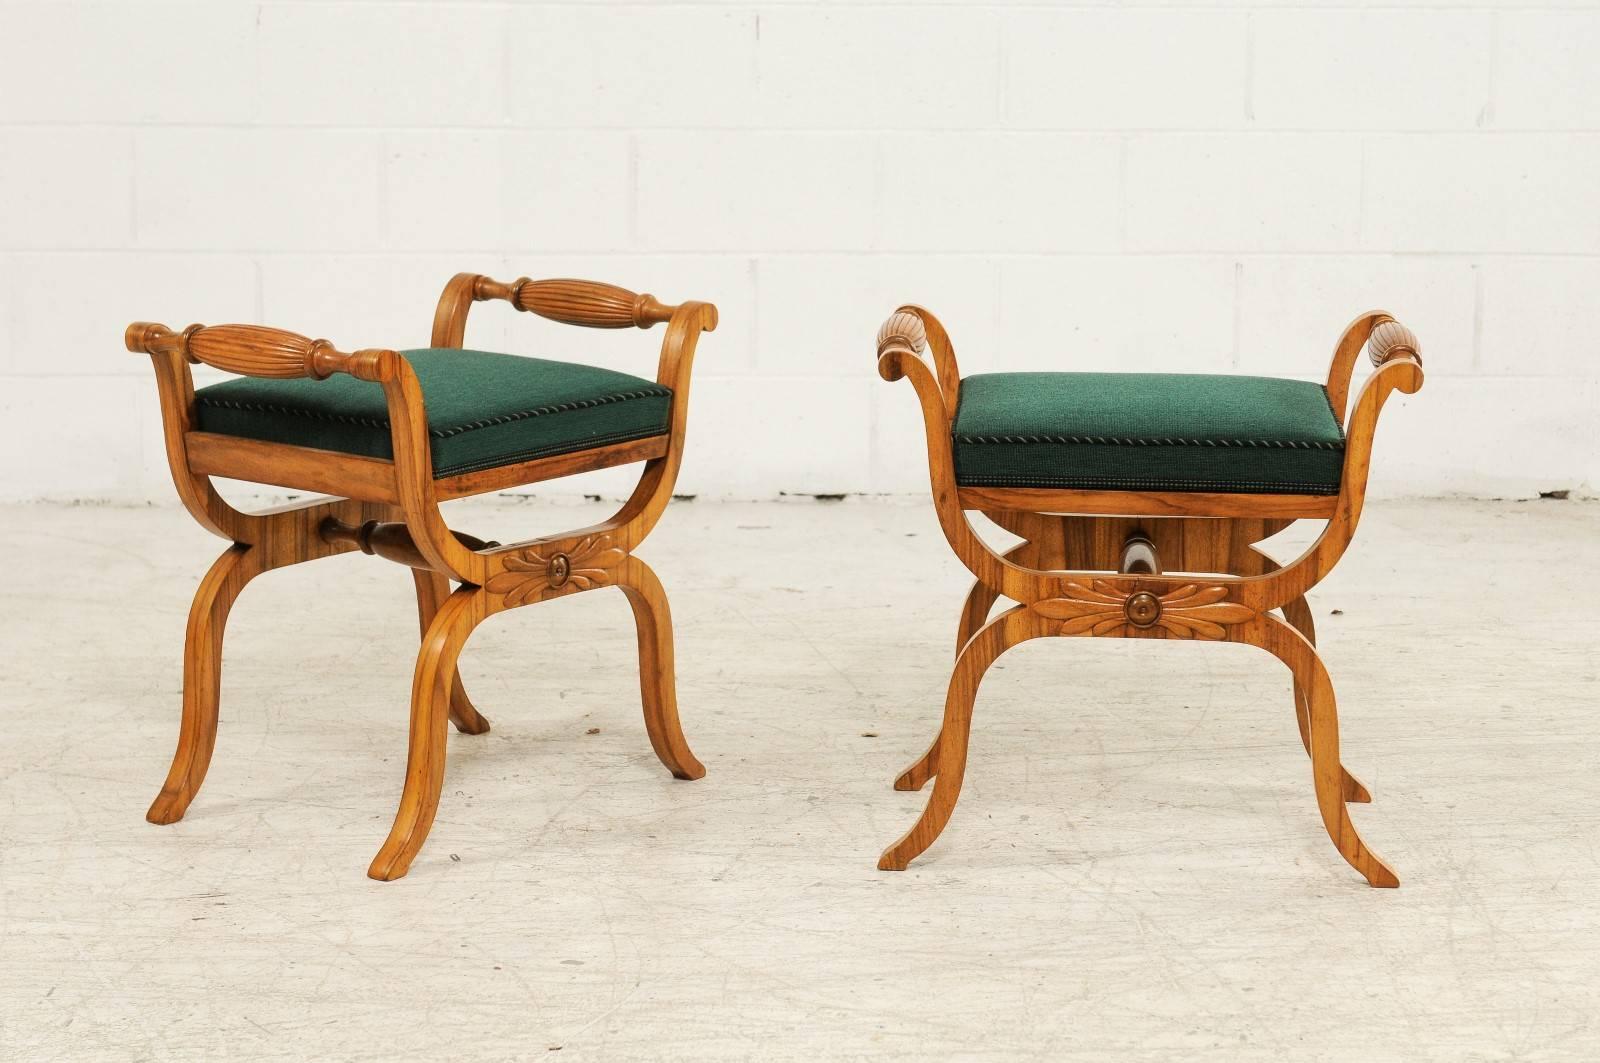 Upholstery Pair of 1850s Austrian Biedermeier X-Form Stools with Green Upholstered Seats